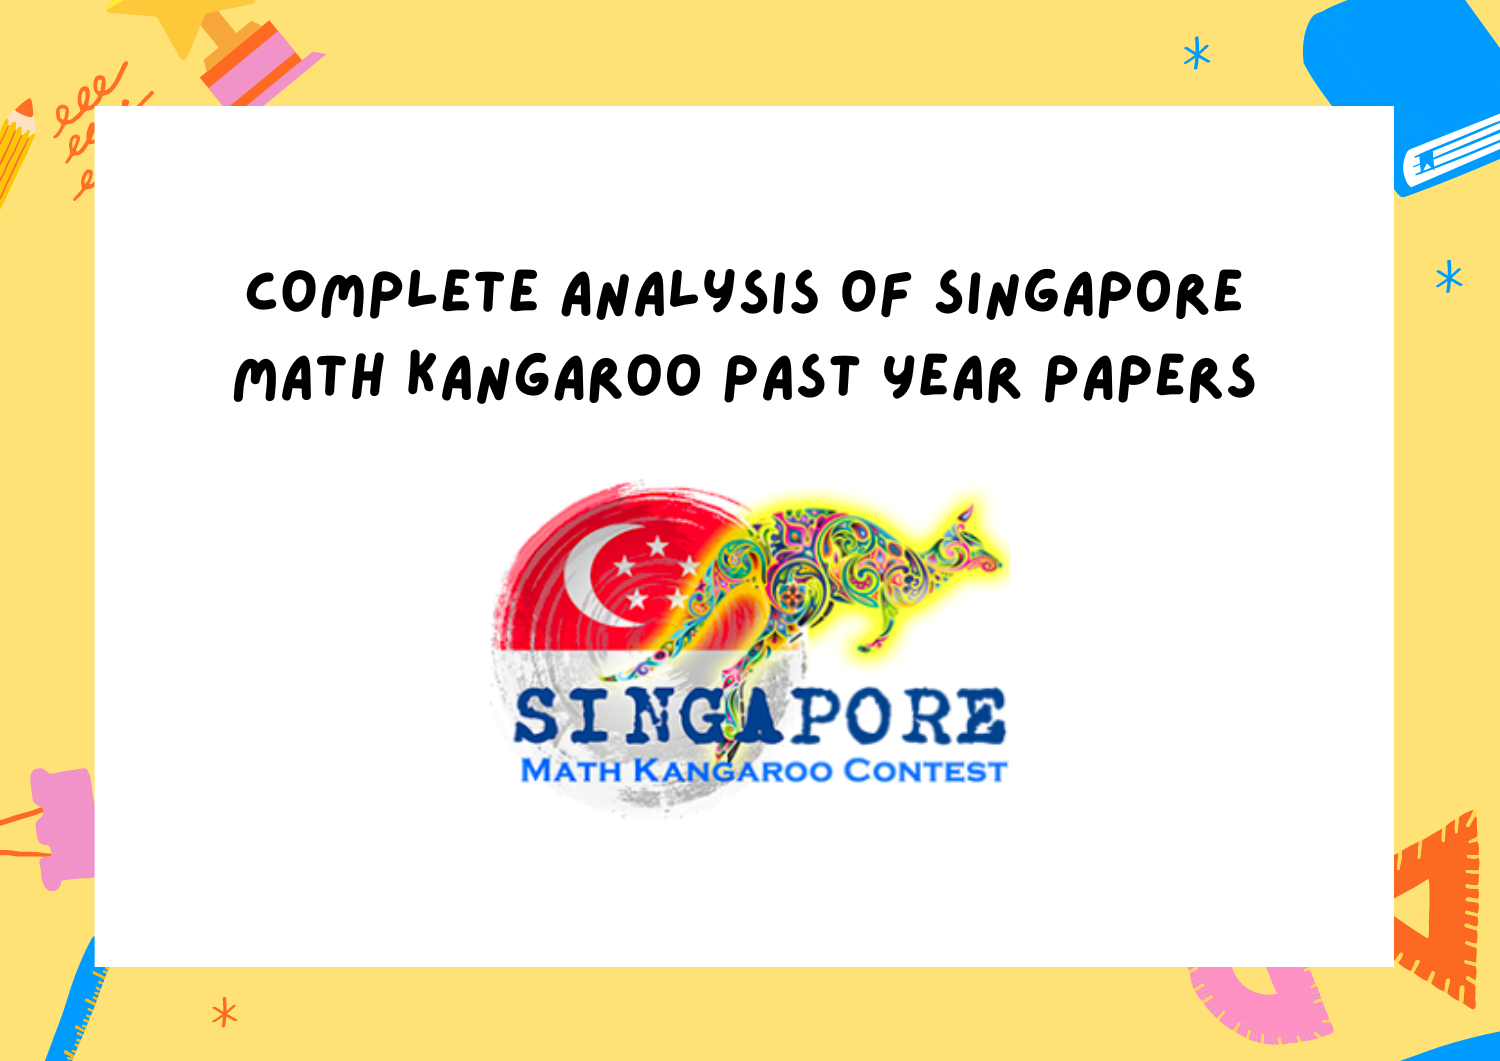 Singapore Math Kangaroo Past Year Papers – A Complete Analysis